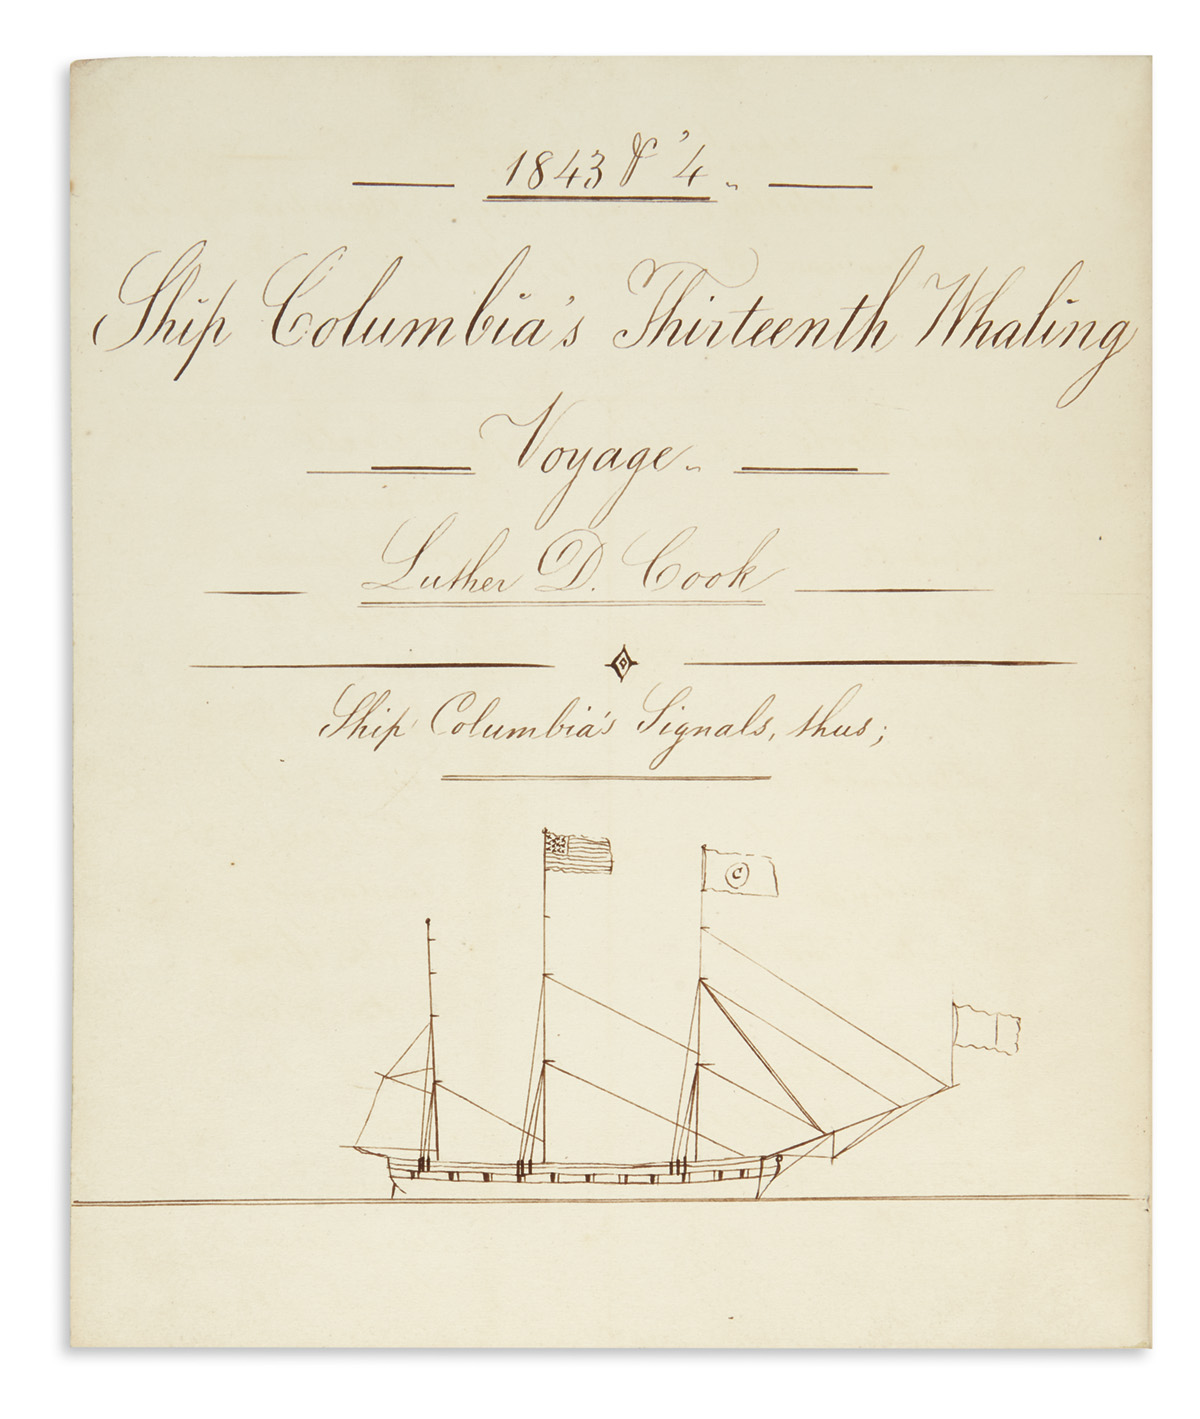 (WHALING.) Record books of Long Island whaling merchant Luther D. Cook.